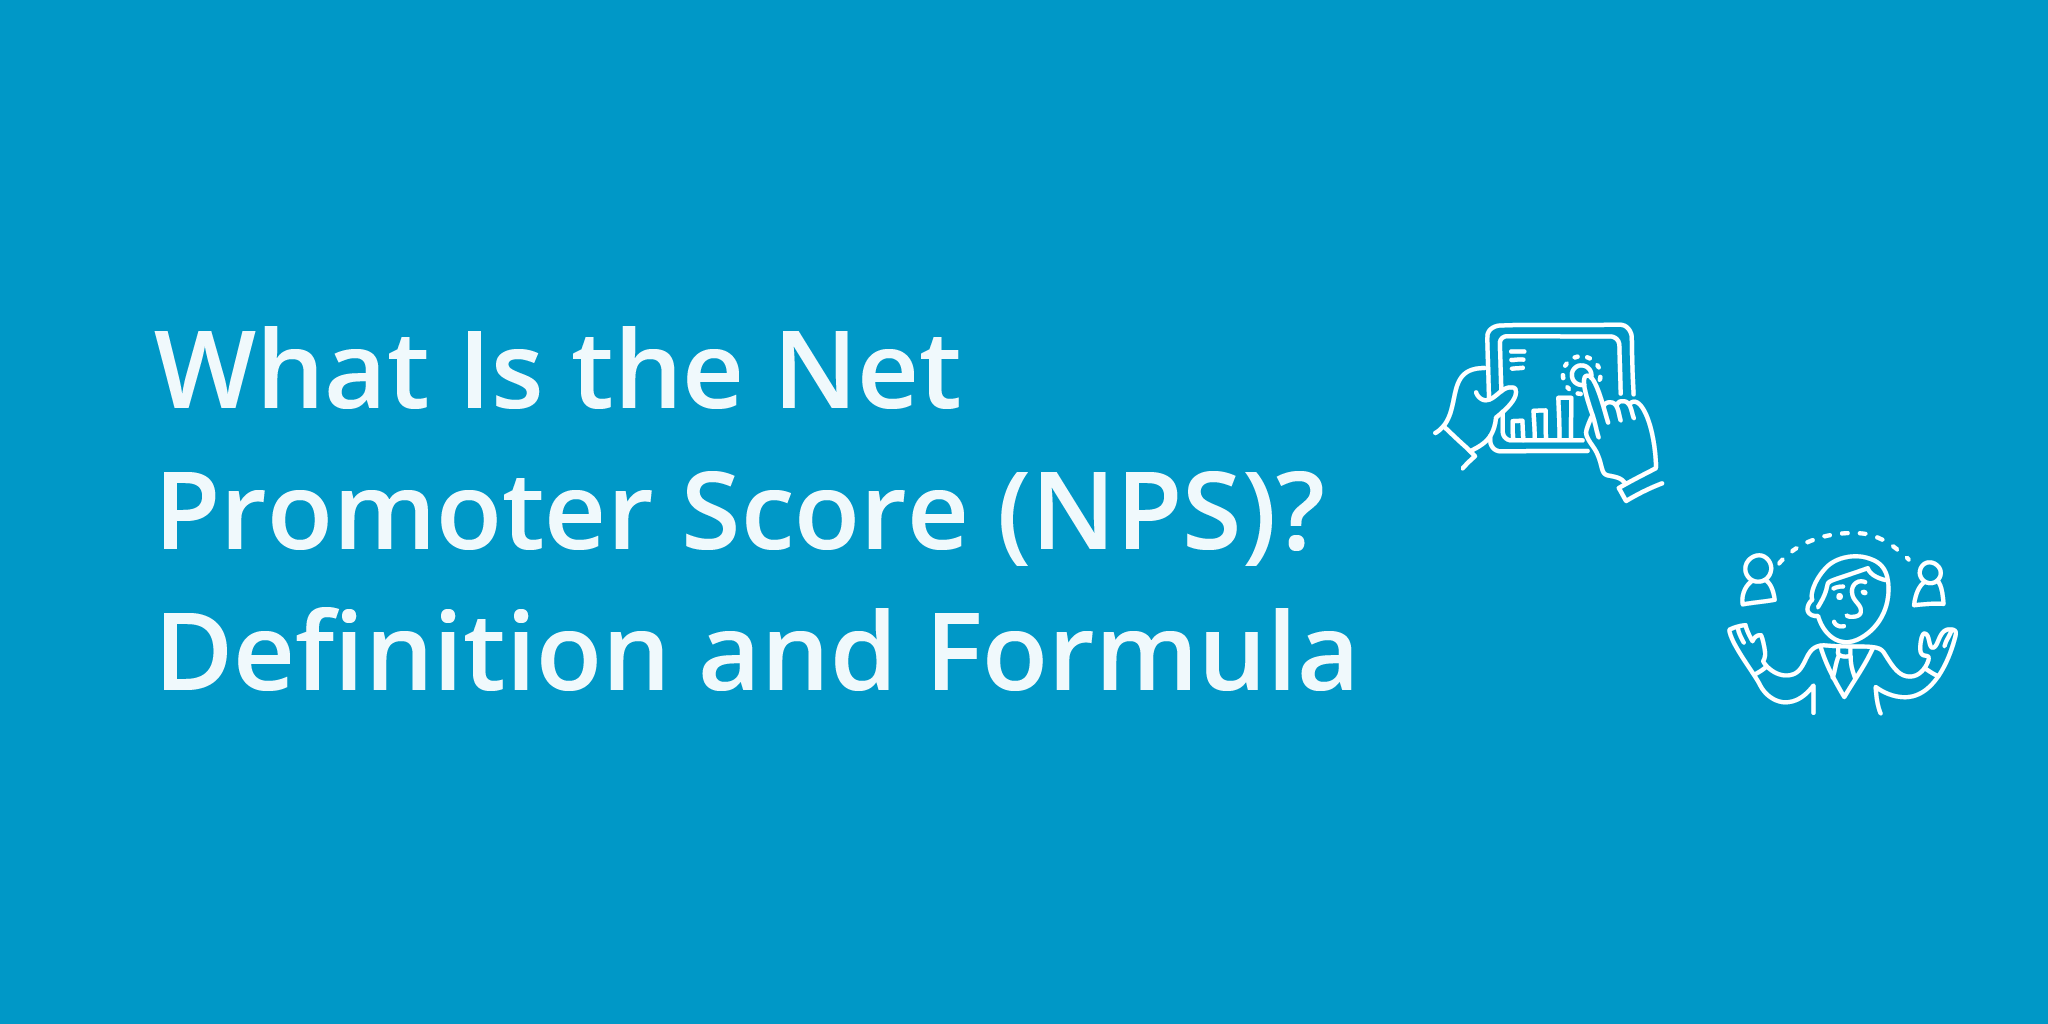 What is Net Promoter Score (NPS)? | Telephones for business